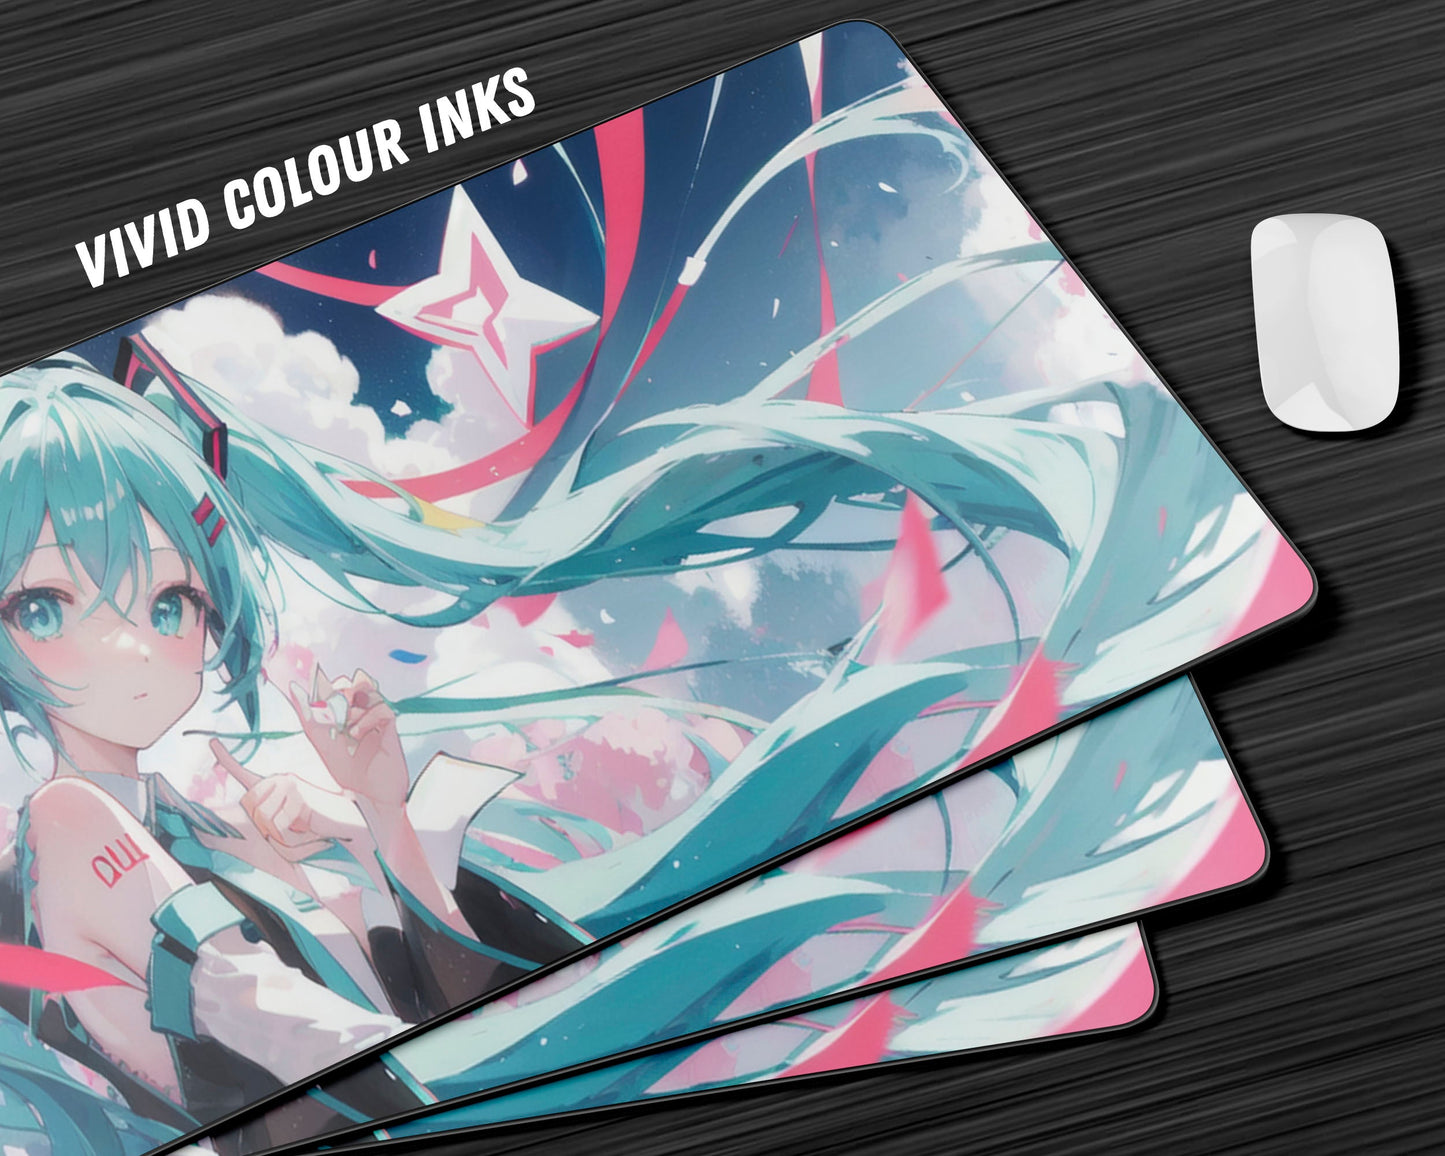 Anime Town Creations Mouse Pad Hatsune Miku Gaming Mouse Pad Accessories - Anime Hatsune Miku Gaming Mouse Pad